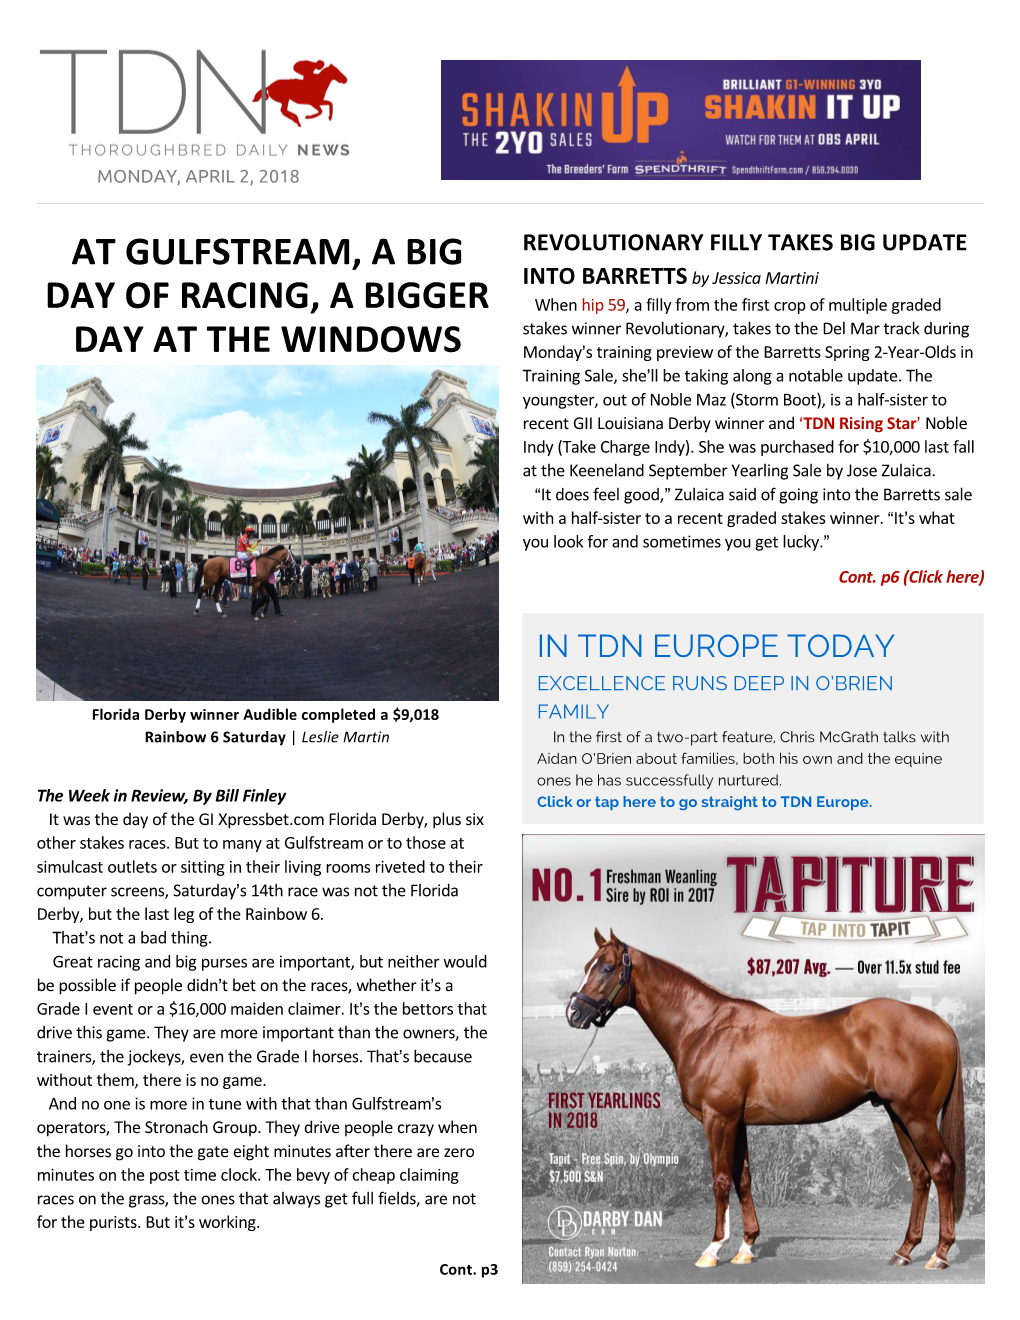 At Gulfstream, a Big Day of Racing, a Bigger Day at The